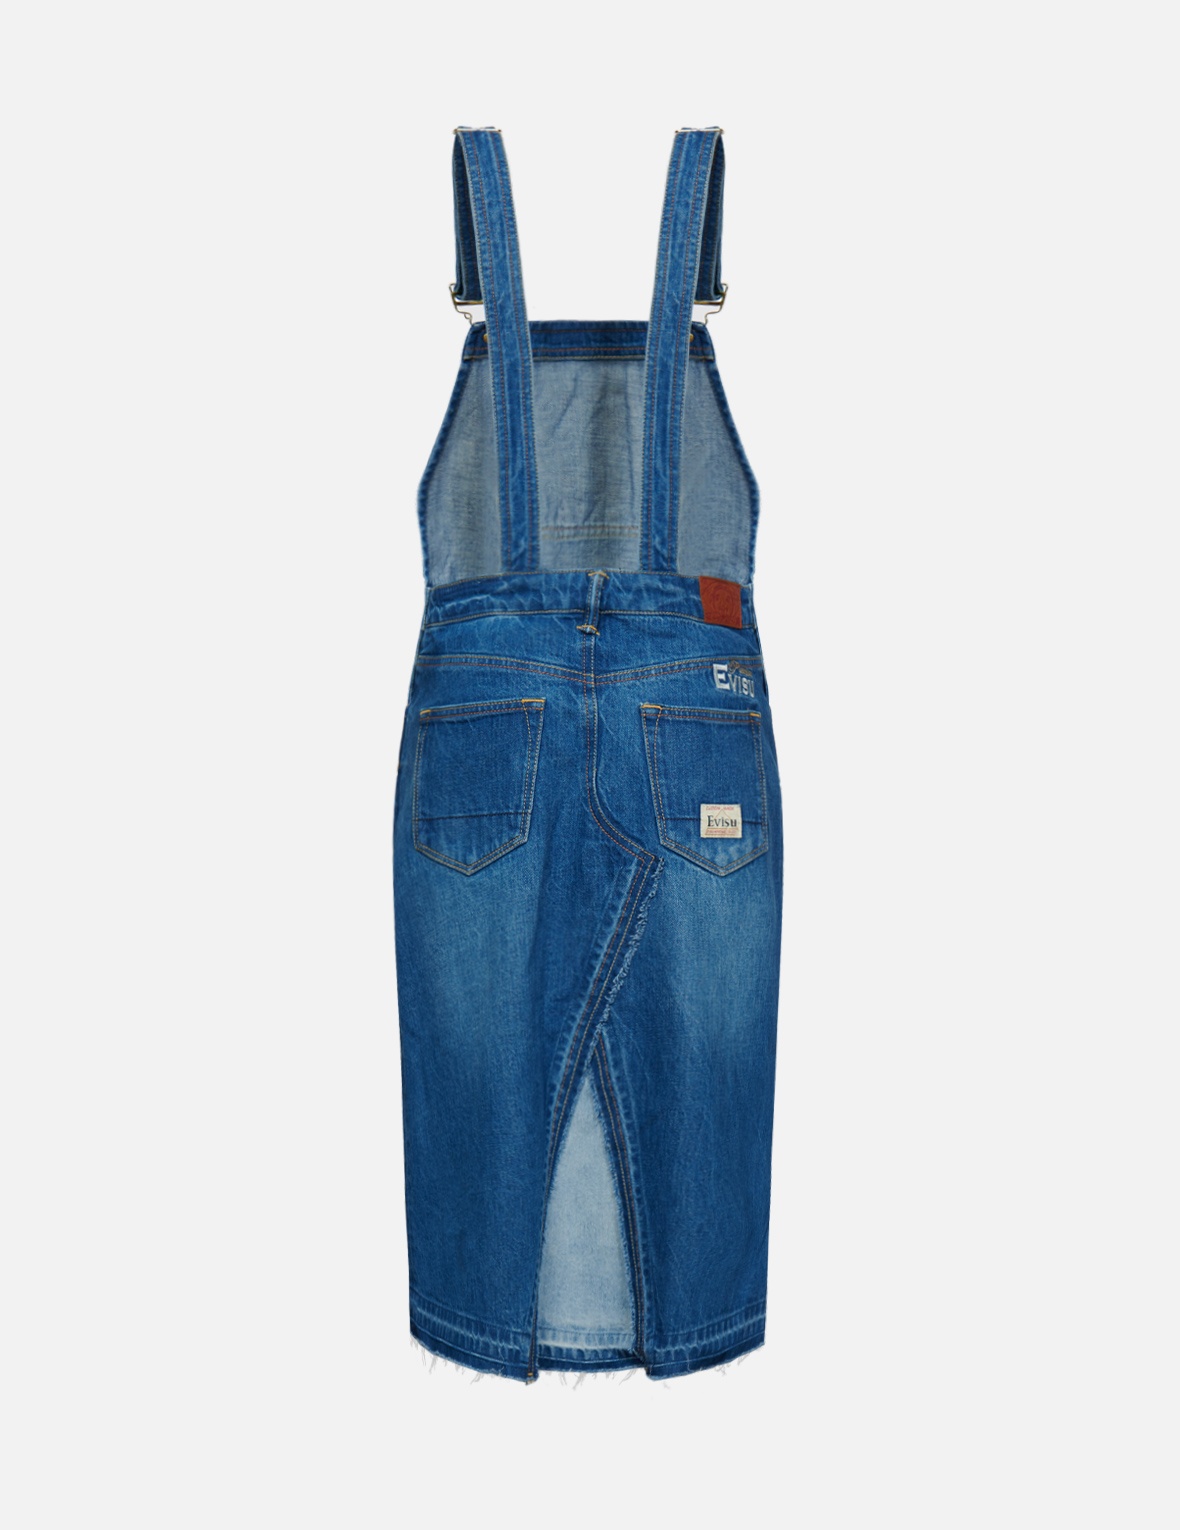 SEAGULL EMBROIDERED DENIM DUNGAREE DRESS - 2